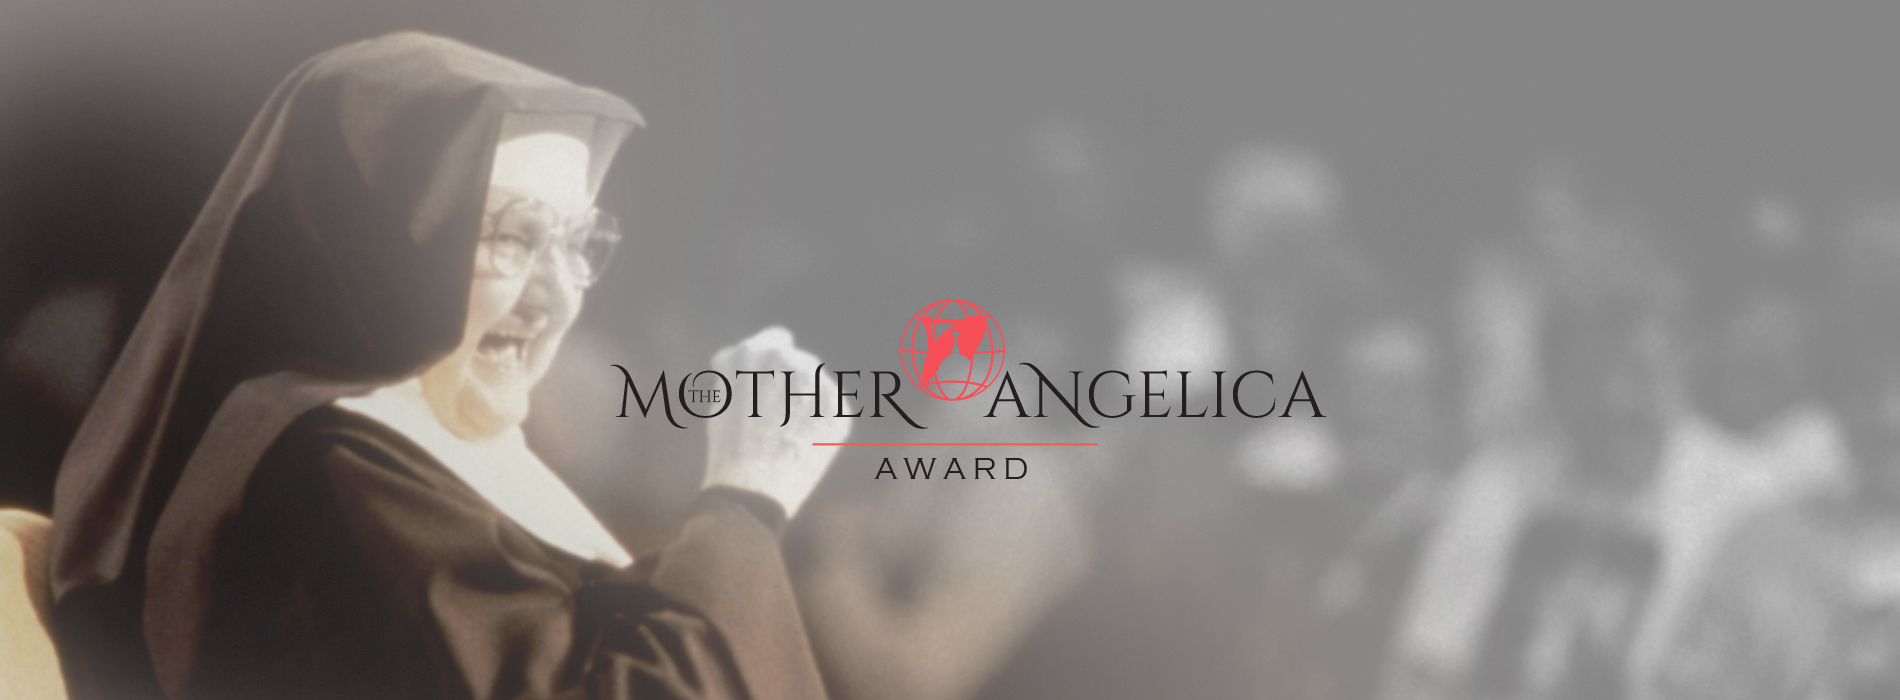 Mother Angelica Award